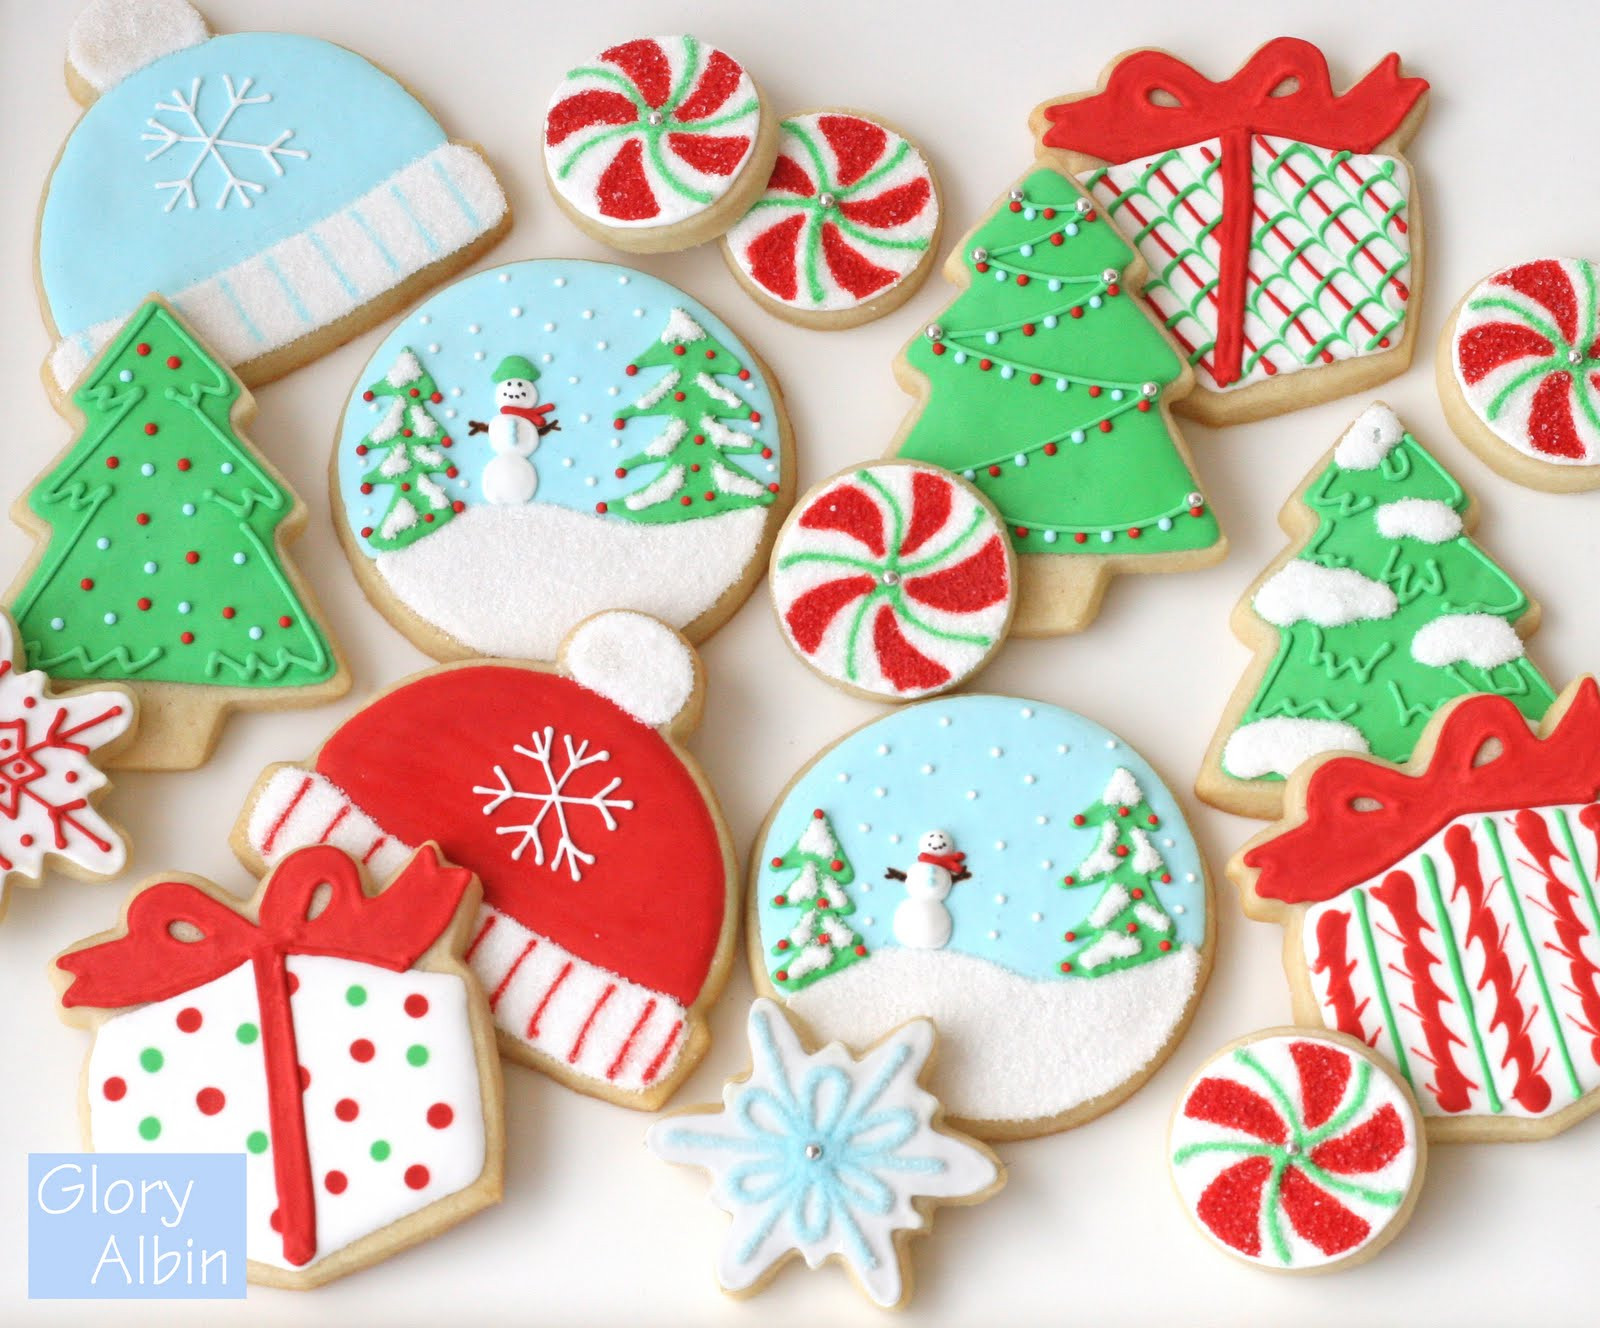 Christmas Cookies With Royal Icing
 Decorating Sugar Cookies with Royal Icing – Glorious Treats